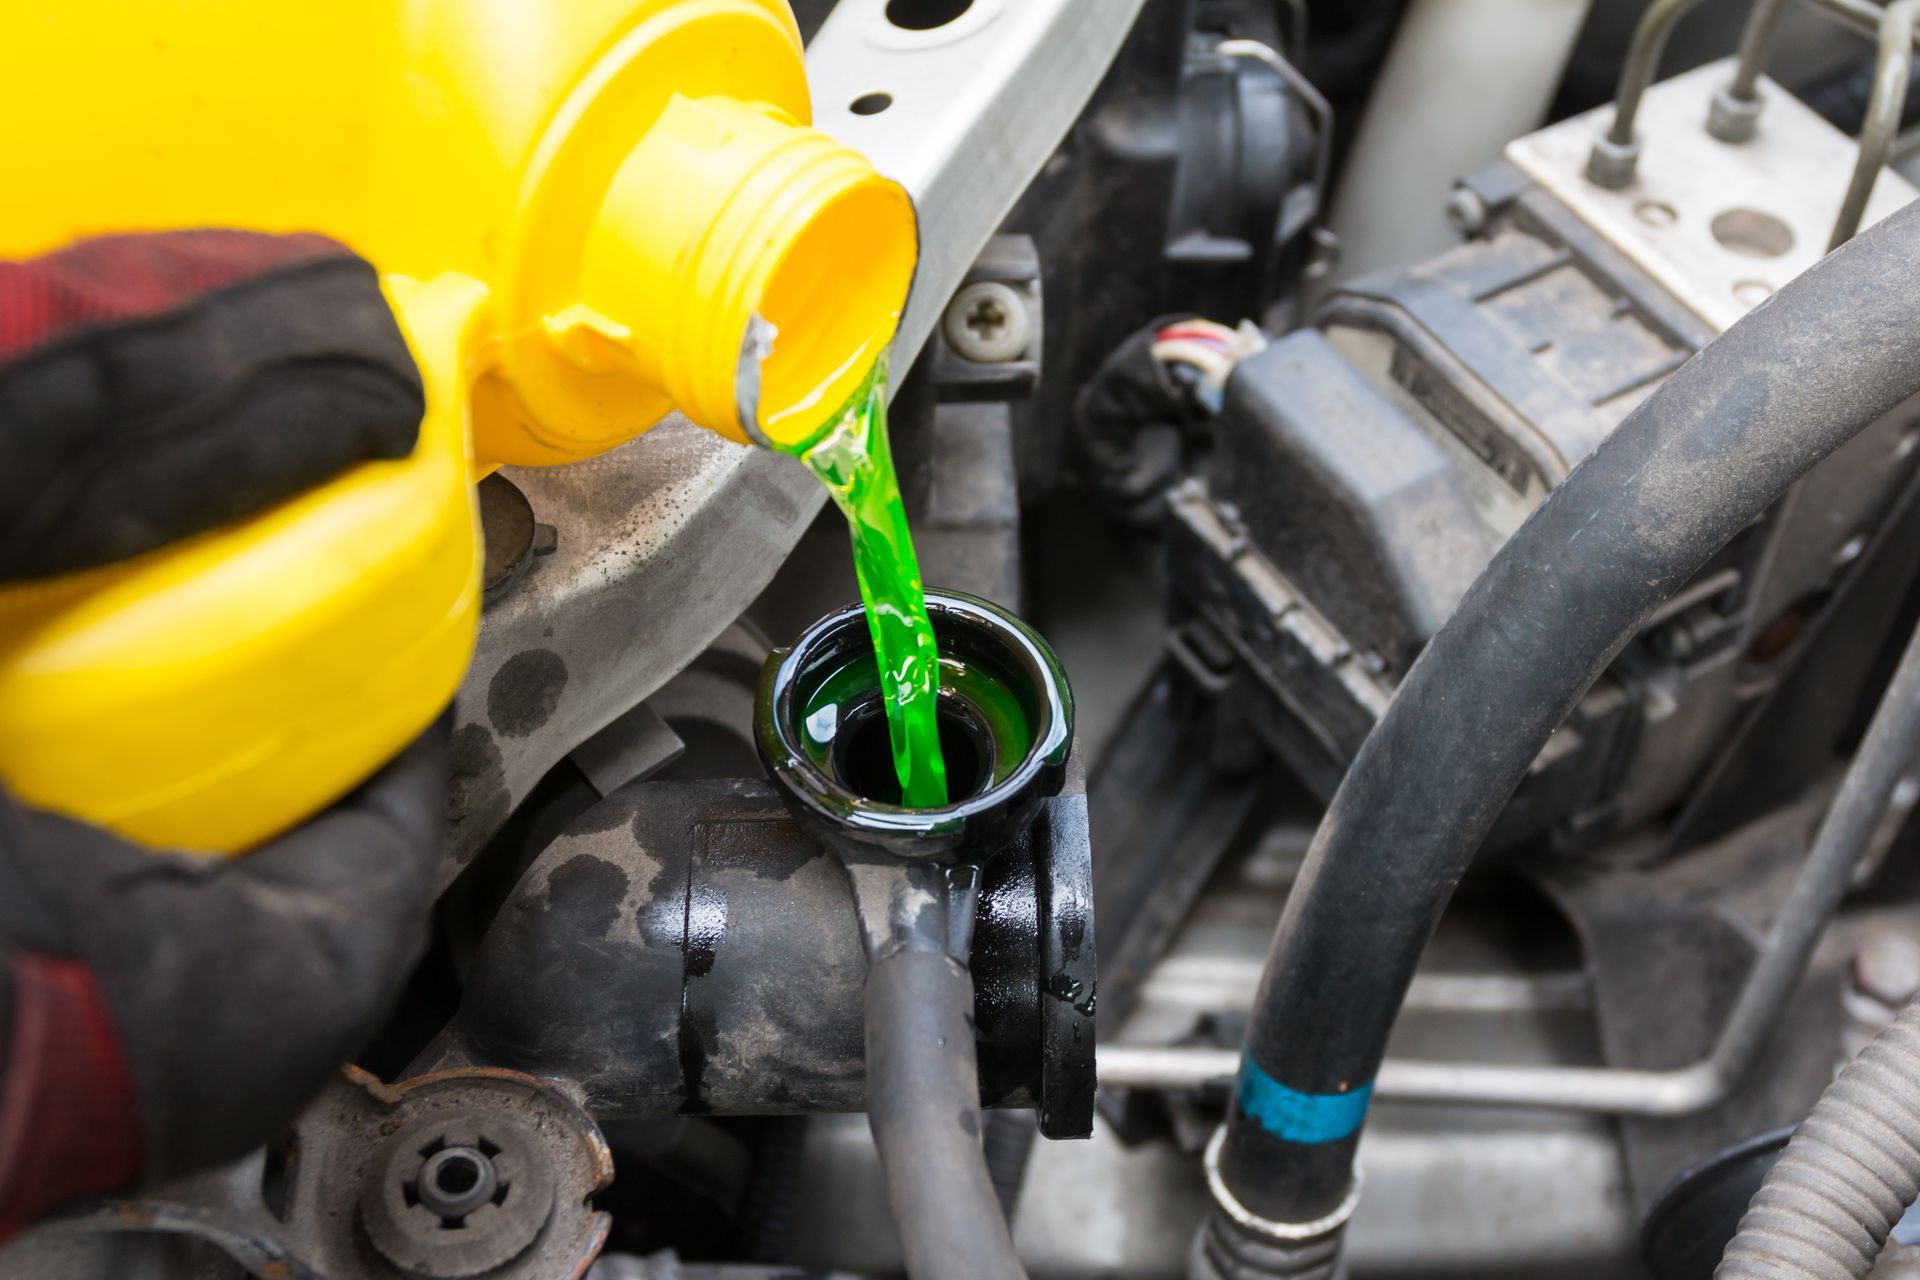 Coolant & Antifreeze at ﻿Jerry's Auto Repair﻿ in ﻿Pullman, WA﻿